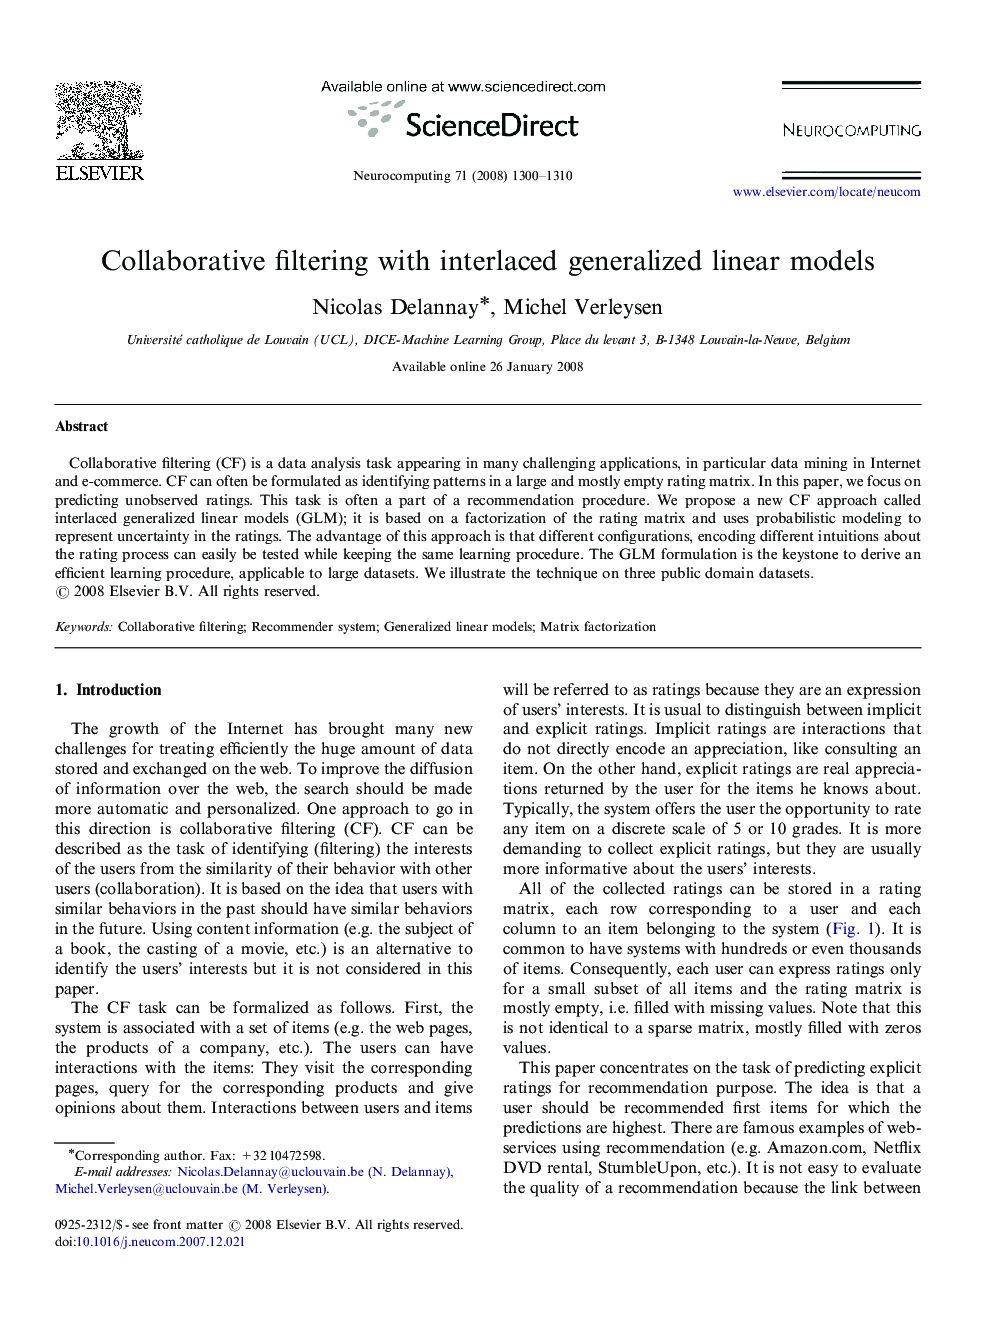 Collaborative filtering with interlaced generalized linear models